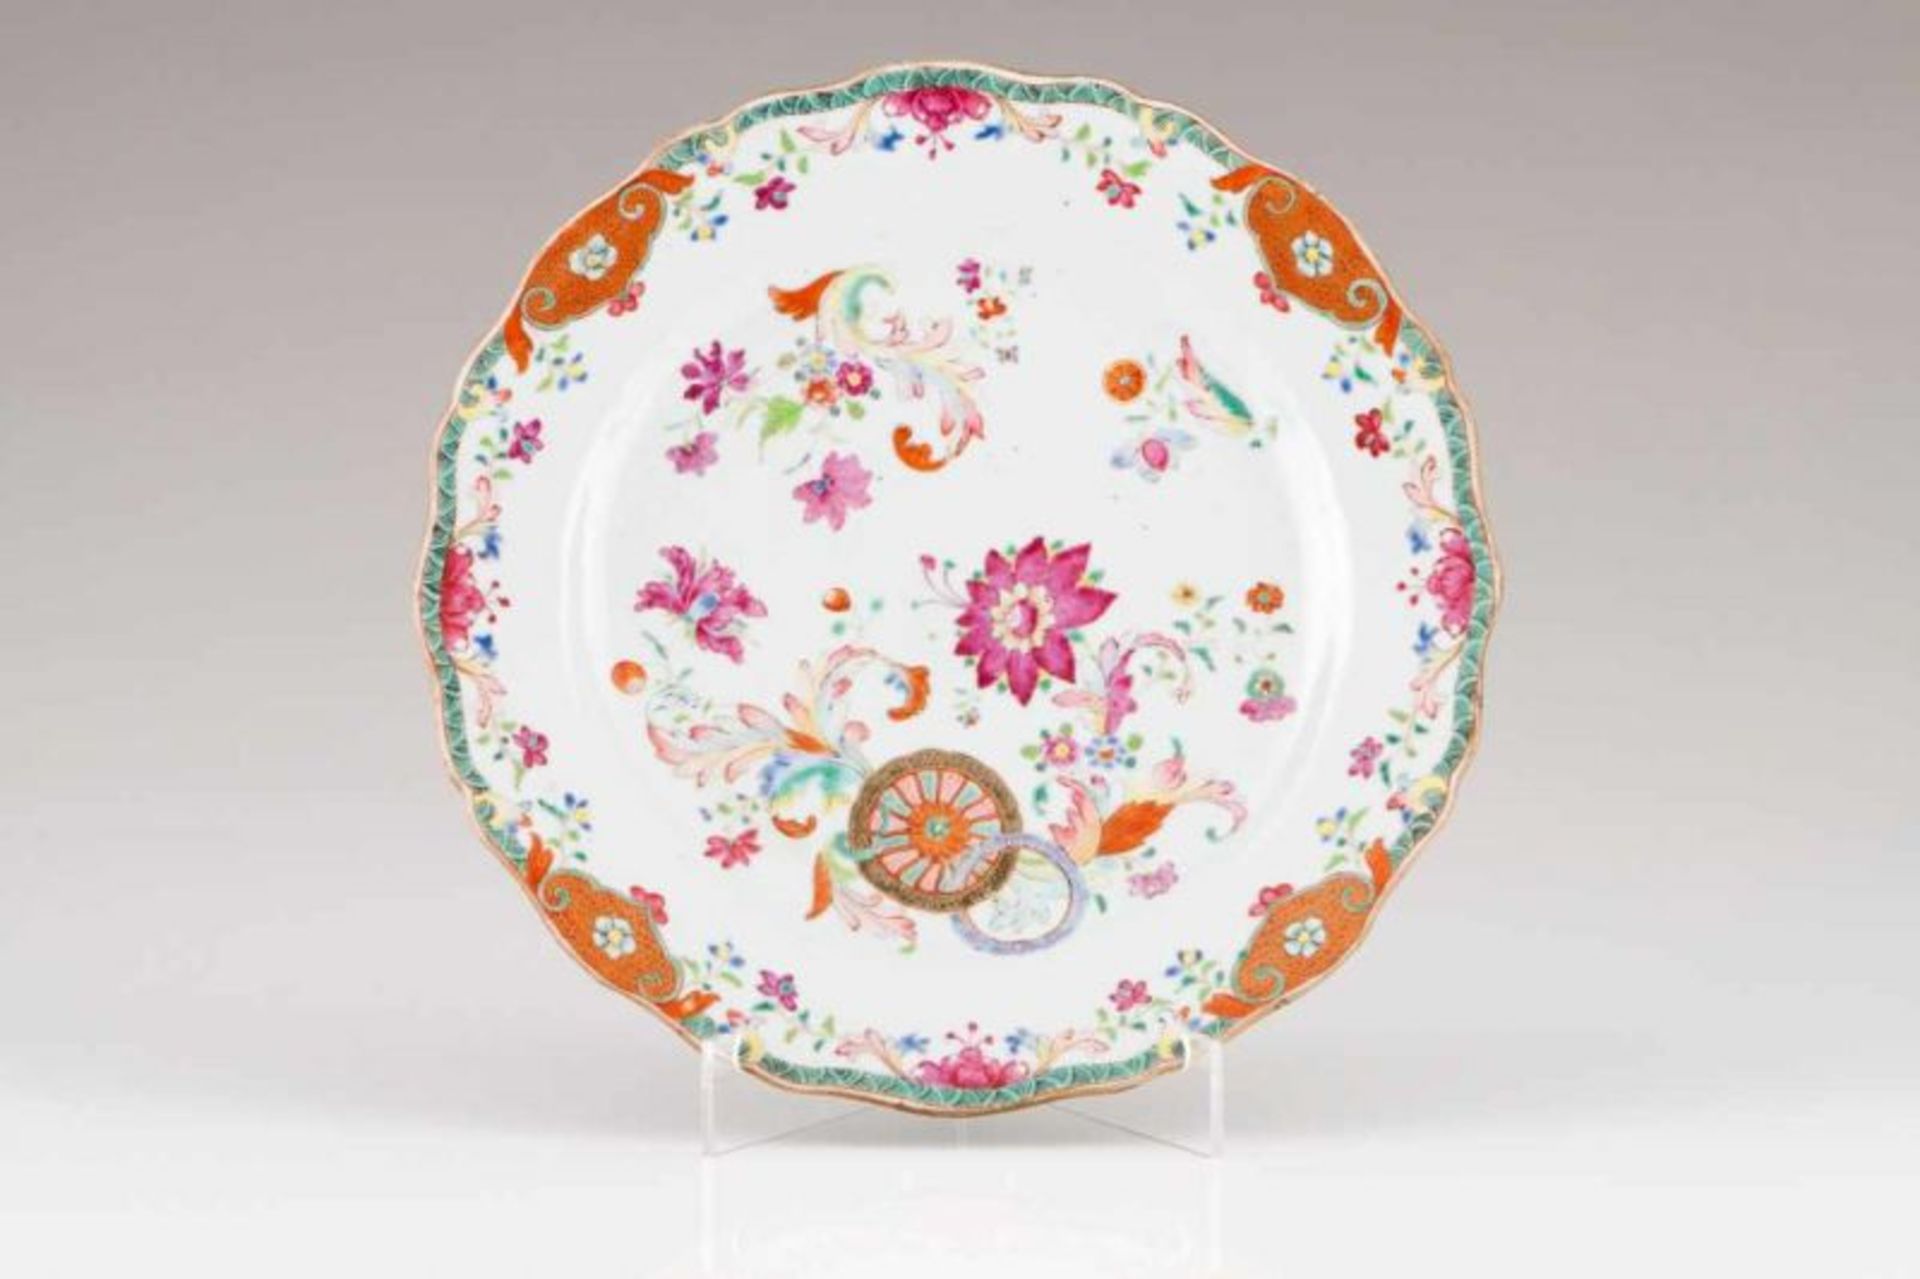 A scalloped plate Chinese export porcelain Polychrome Famille Rose "tea leaf" and flowers